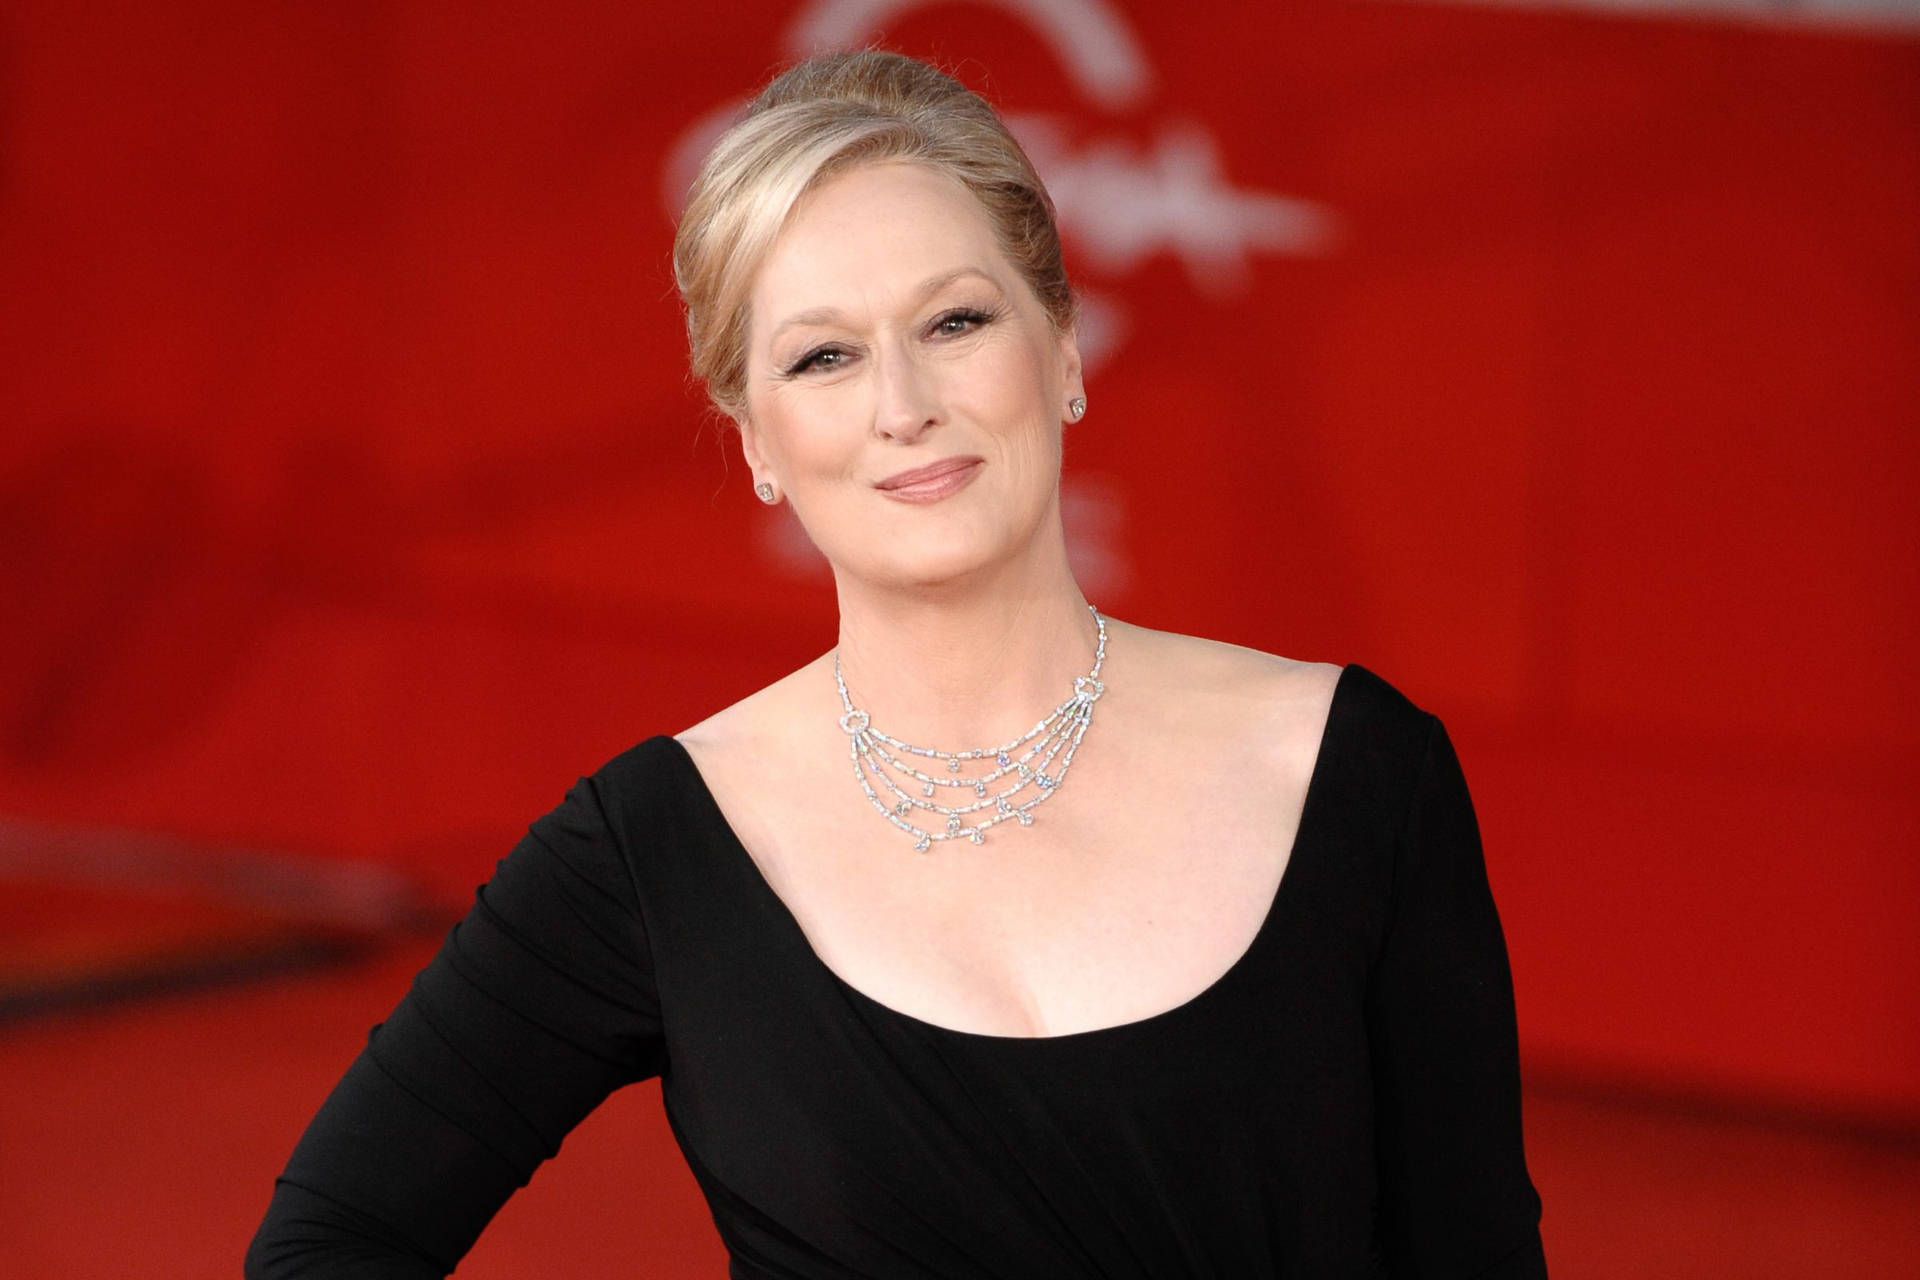 Meryl Streep On A Red Backdrop Background